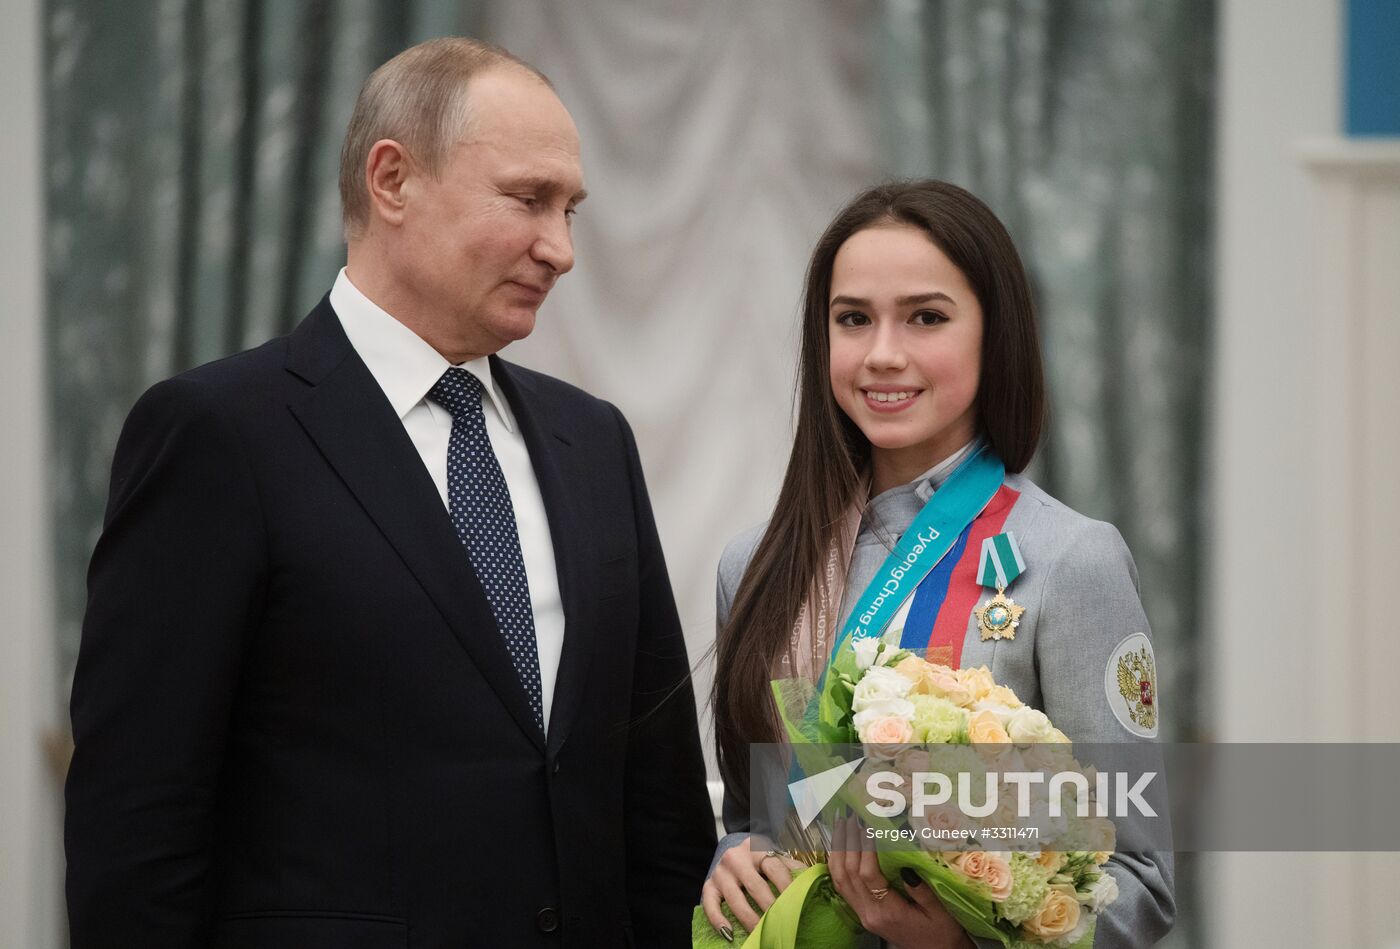 President Vladimir Putin presents state awards to 2018 Winter Olympics winners and medalists